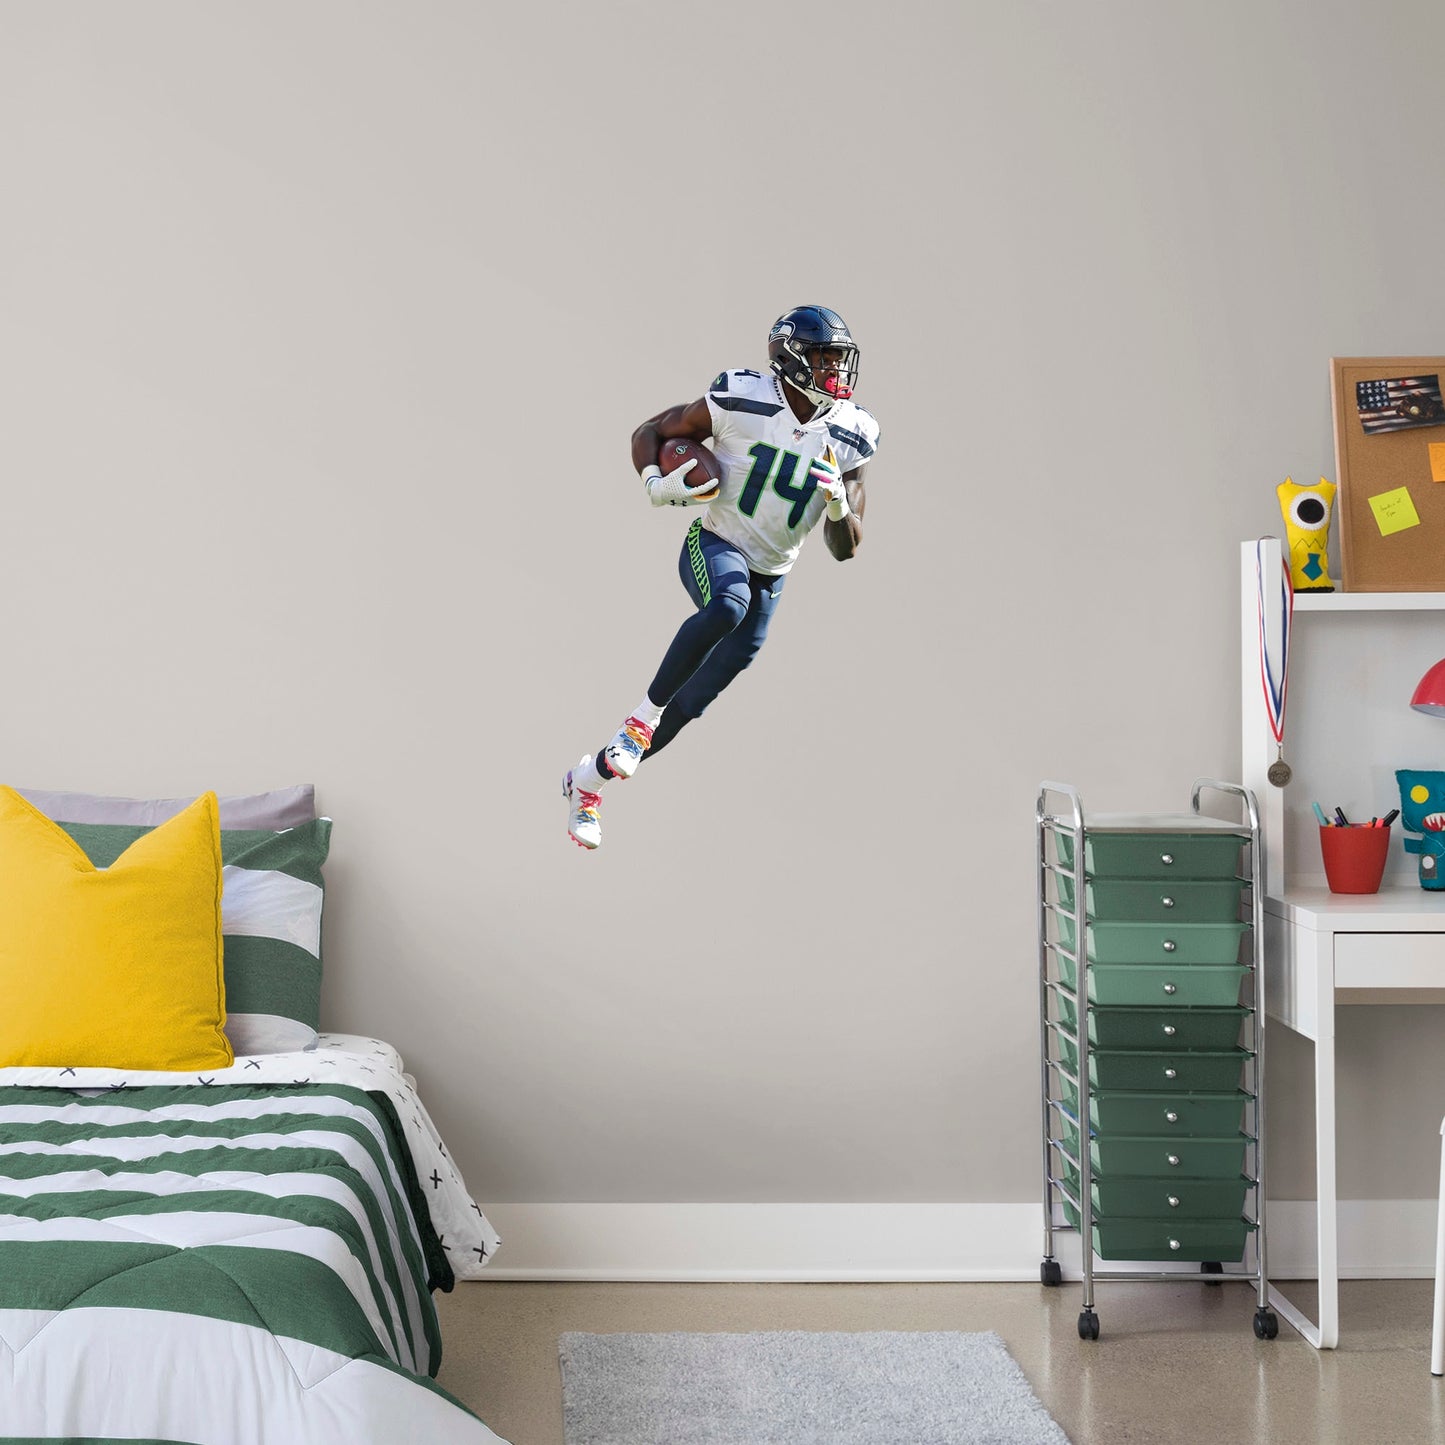 X-Large Athlete + 2 Decals (22"W x 38"H) Outmaneuver boring walls with this removable wall decal featuring D.K. Metcalf showing other players how to roll with it. This quality, giftable decal showcases Baby Bron in mid-sprint, clutching the football defensively while wearing the Seahawks' signature College Navy, Action Green, and Wolf Gray colors. This durable decal will help you demonstrate a strong offense in your bedroom, office, or entertainment room.